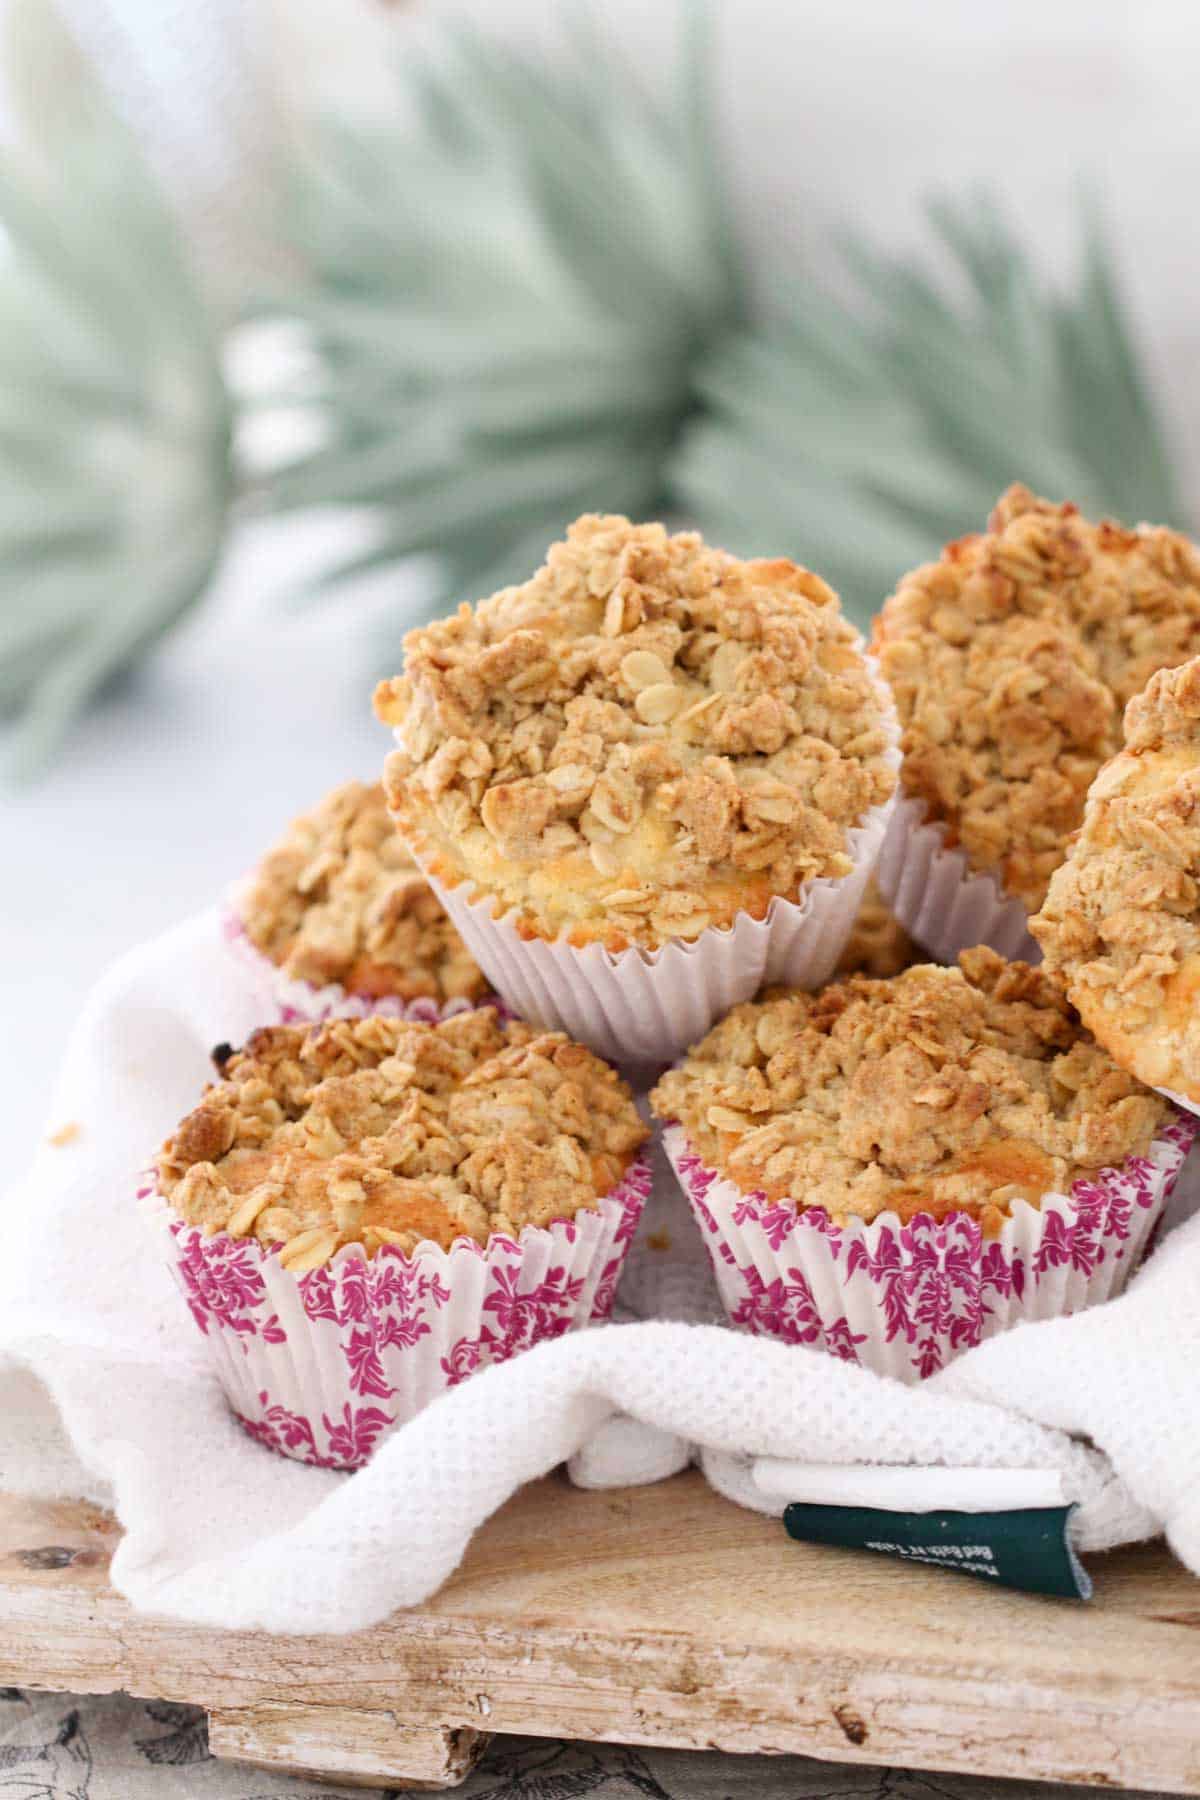 A pile of apple crumble muffins in pink and white paper cases on a wooden board.